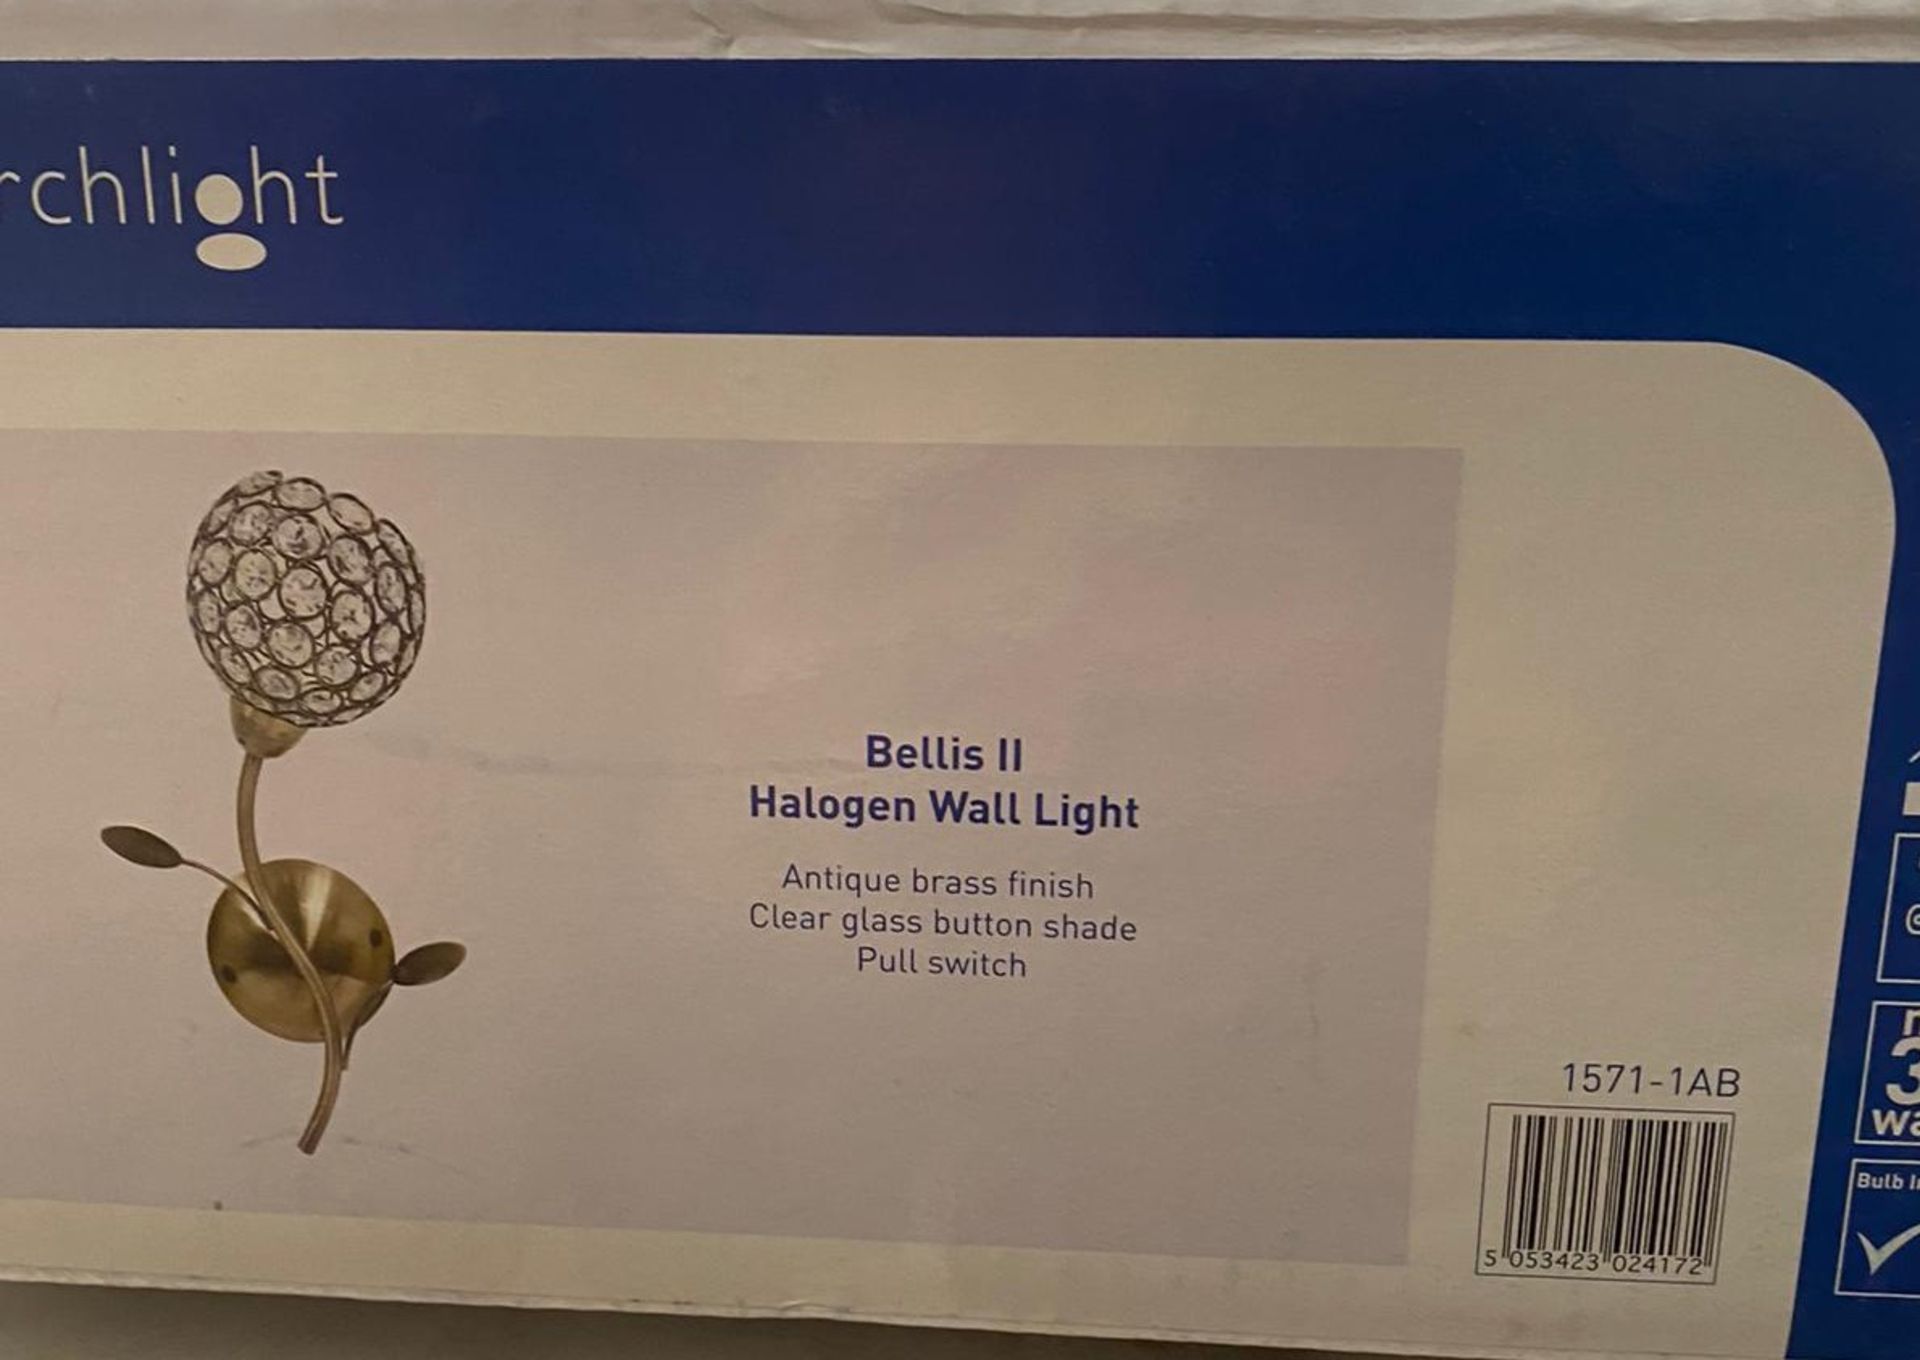 2 x Searchlight Bellis II Halogen in Antique Brass - Ref: 1571-1AB - New and Boxed - RRP; £60